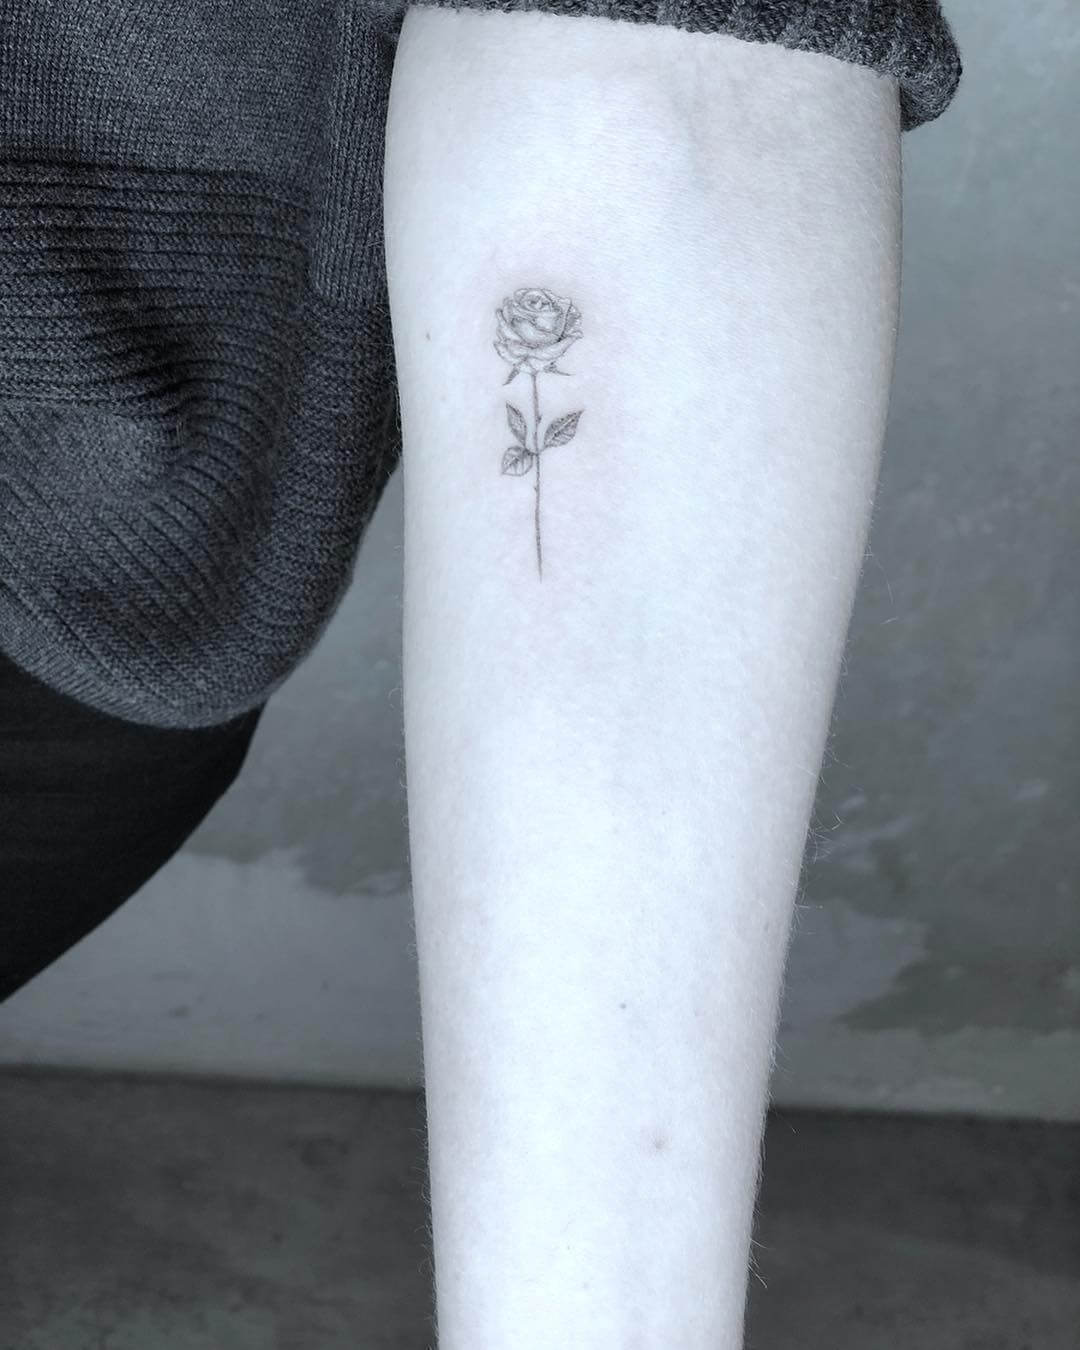 101 Best Small Rose Tattoo Ideas You Have To See To Believe!